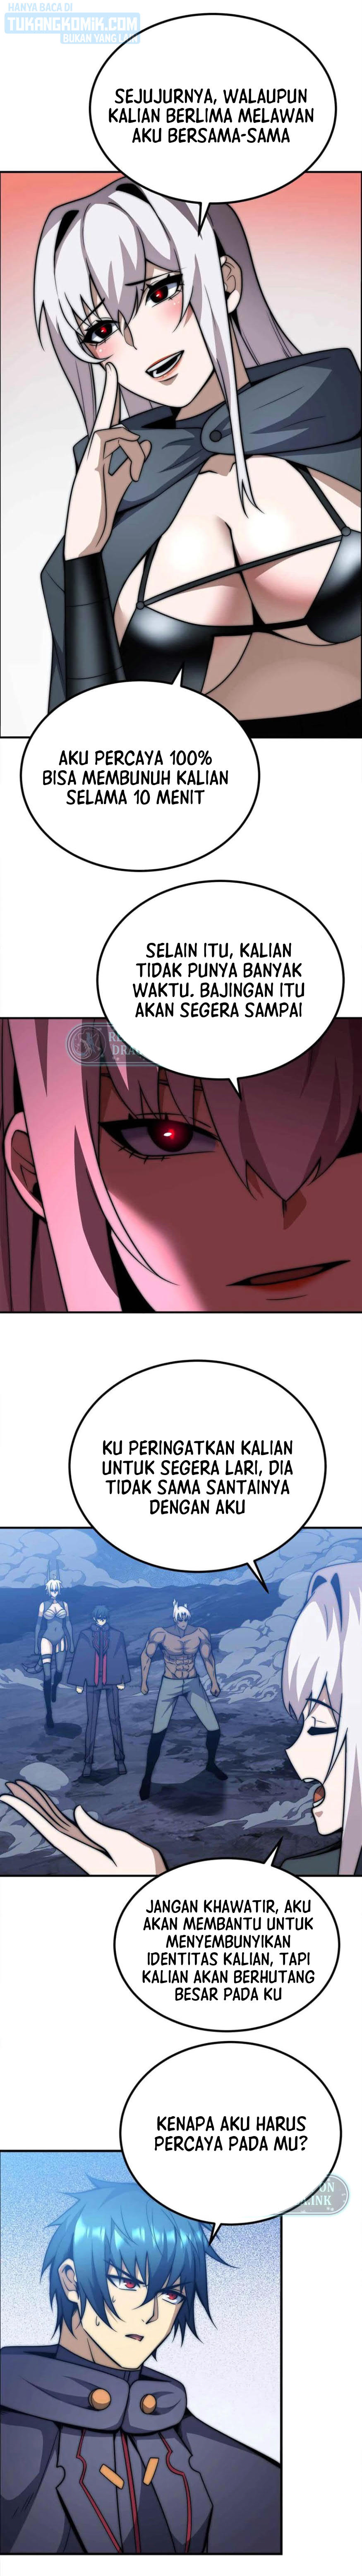 demon king cheat system Chapter 49